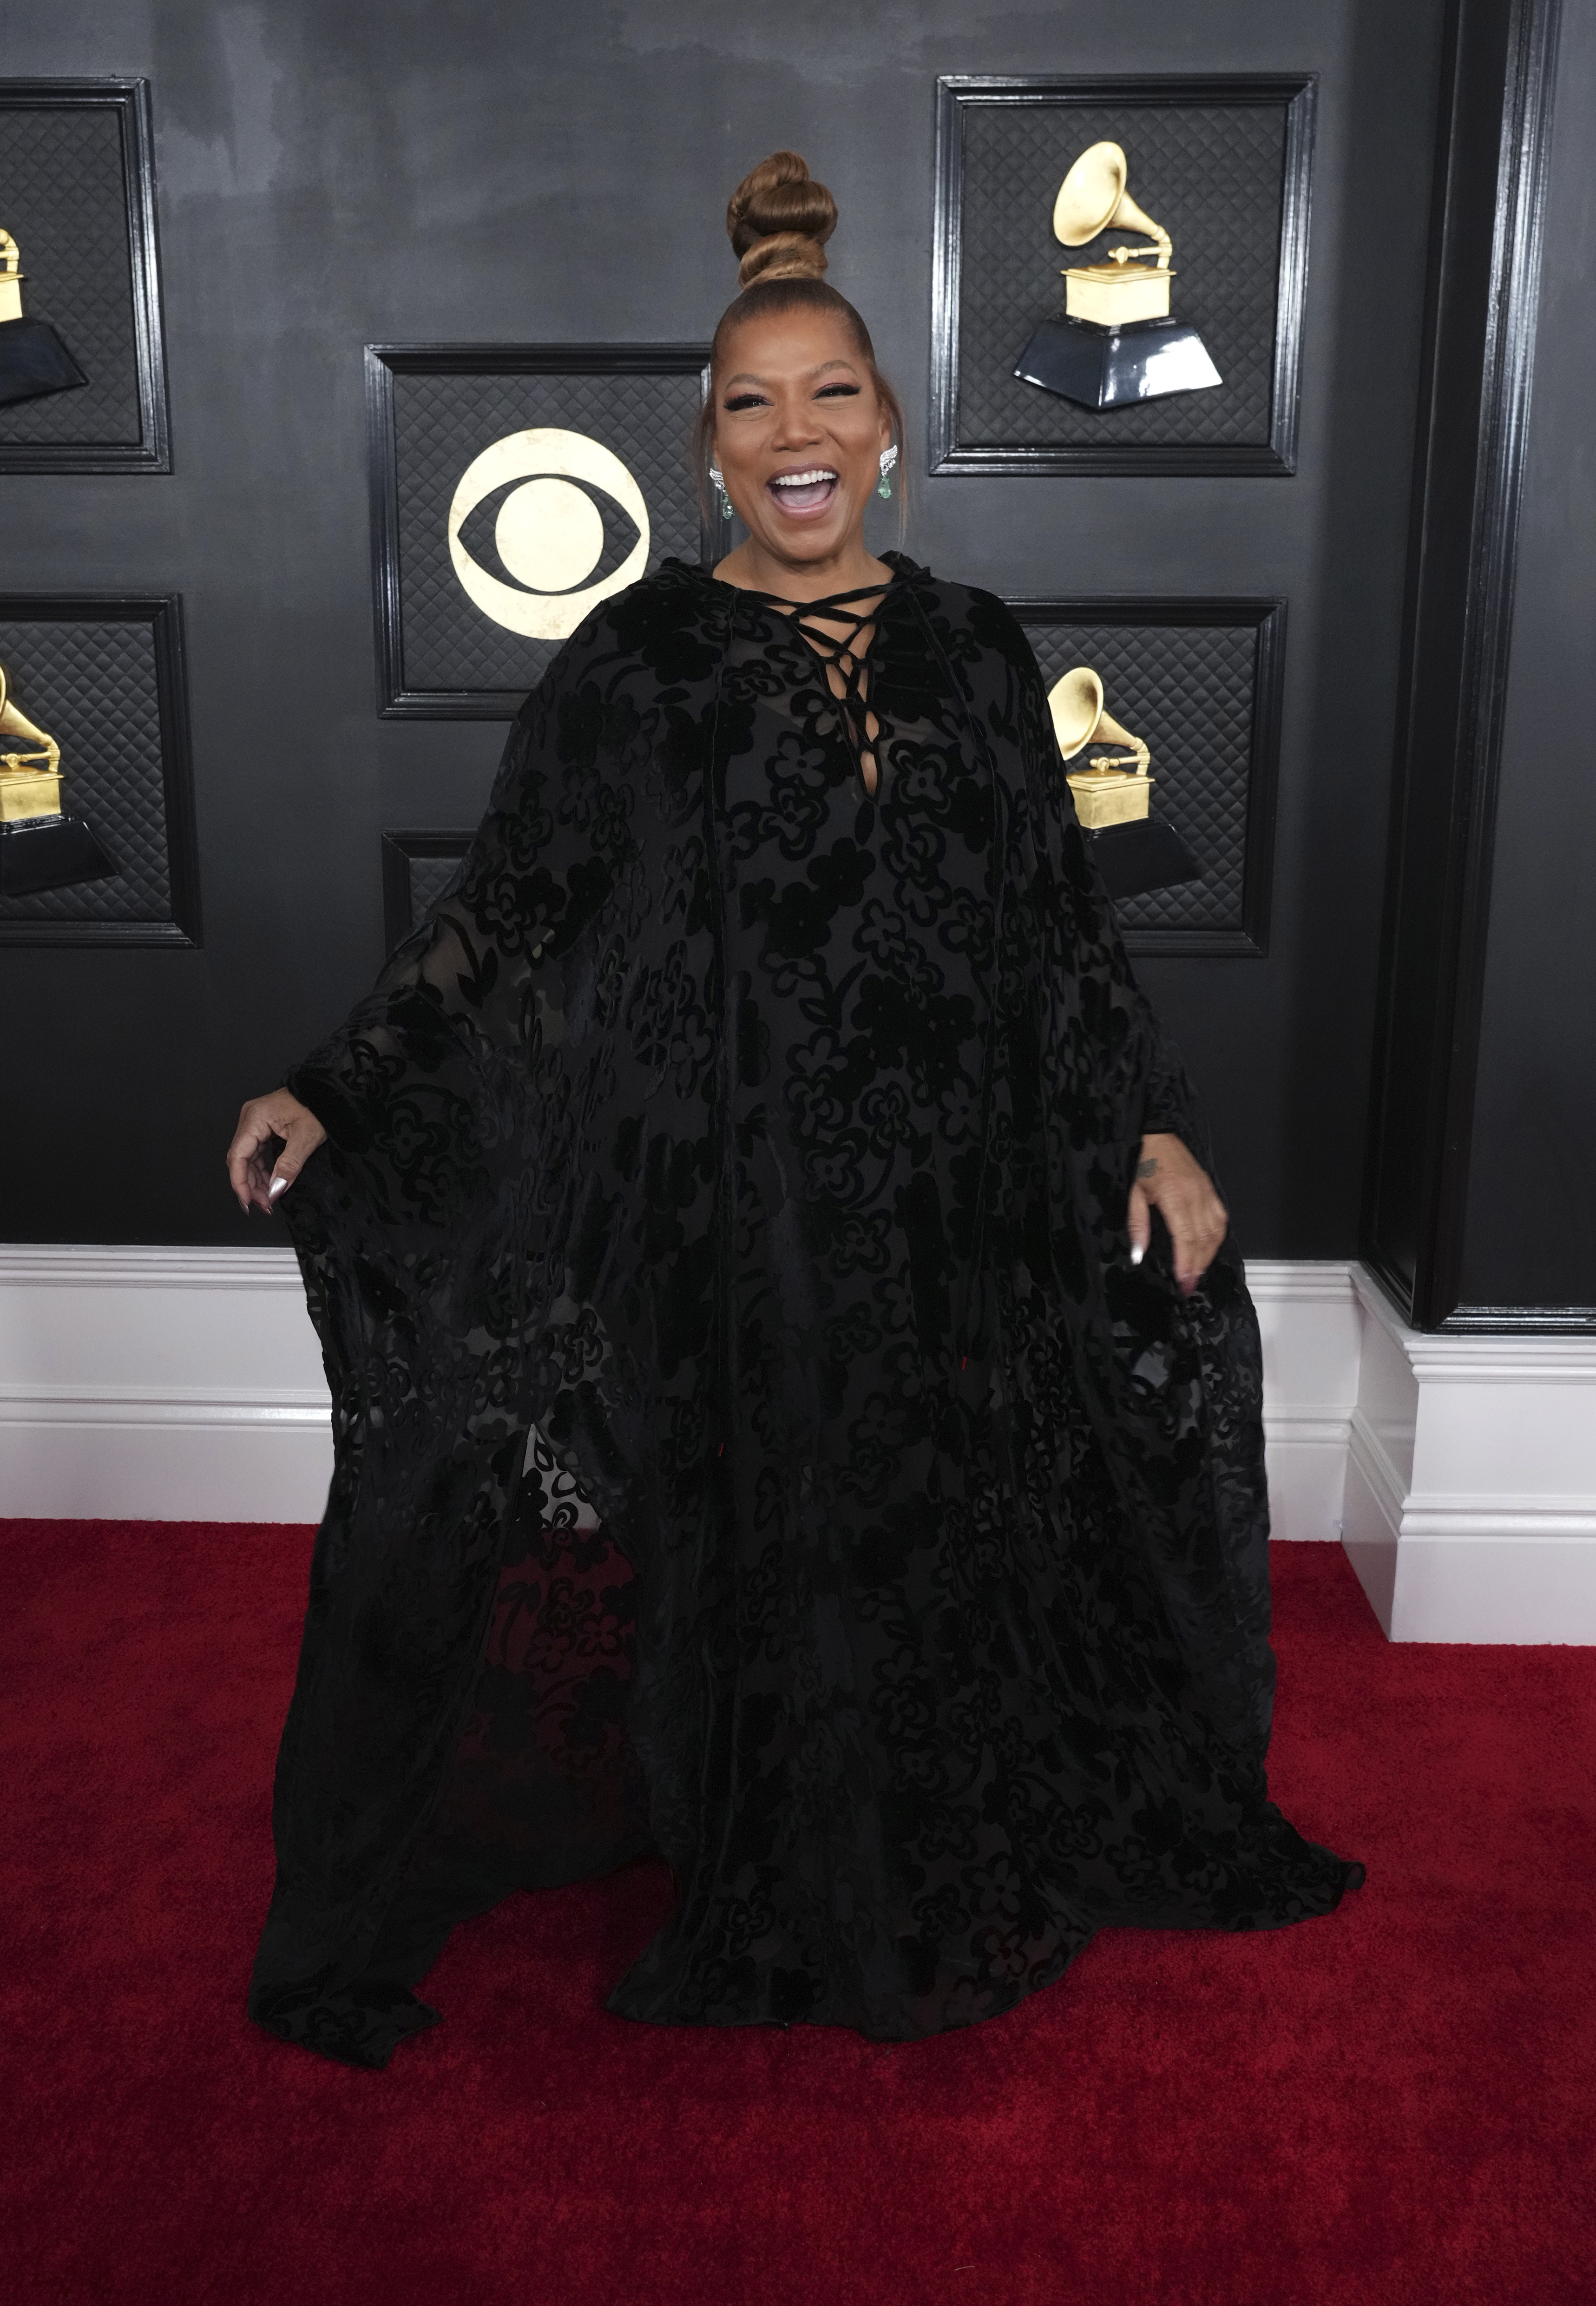 Queen Latifah wearing a long-sleeved black dress with chris-cross ties at the front. 